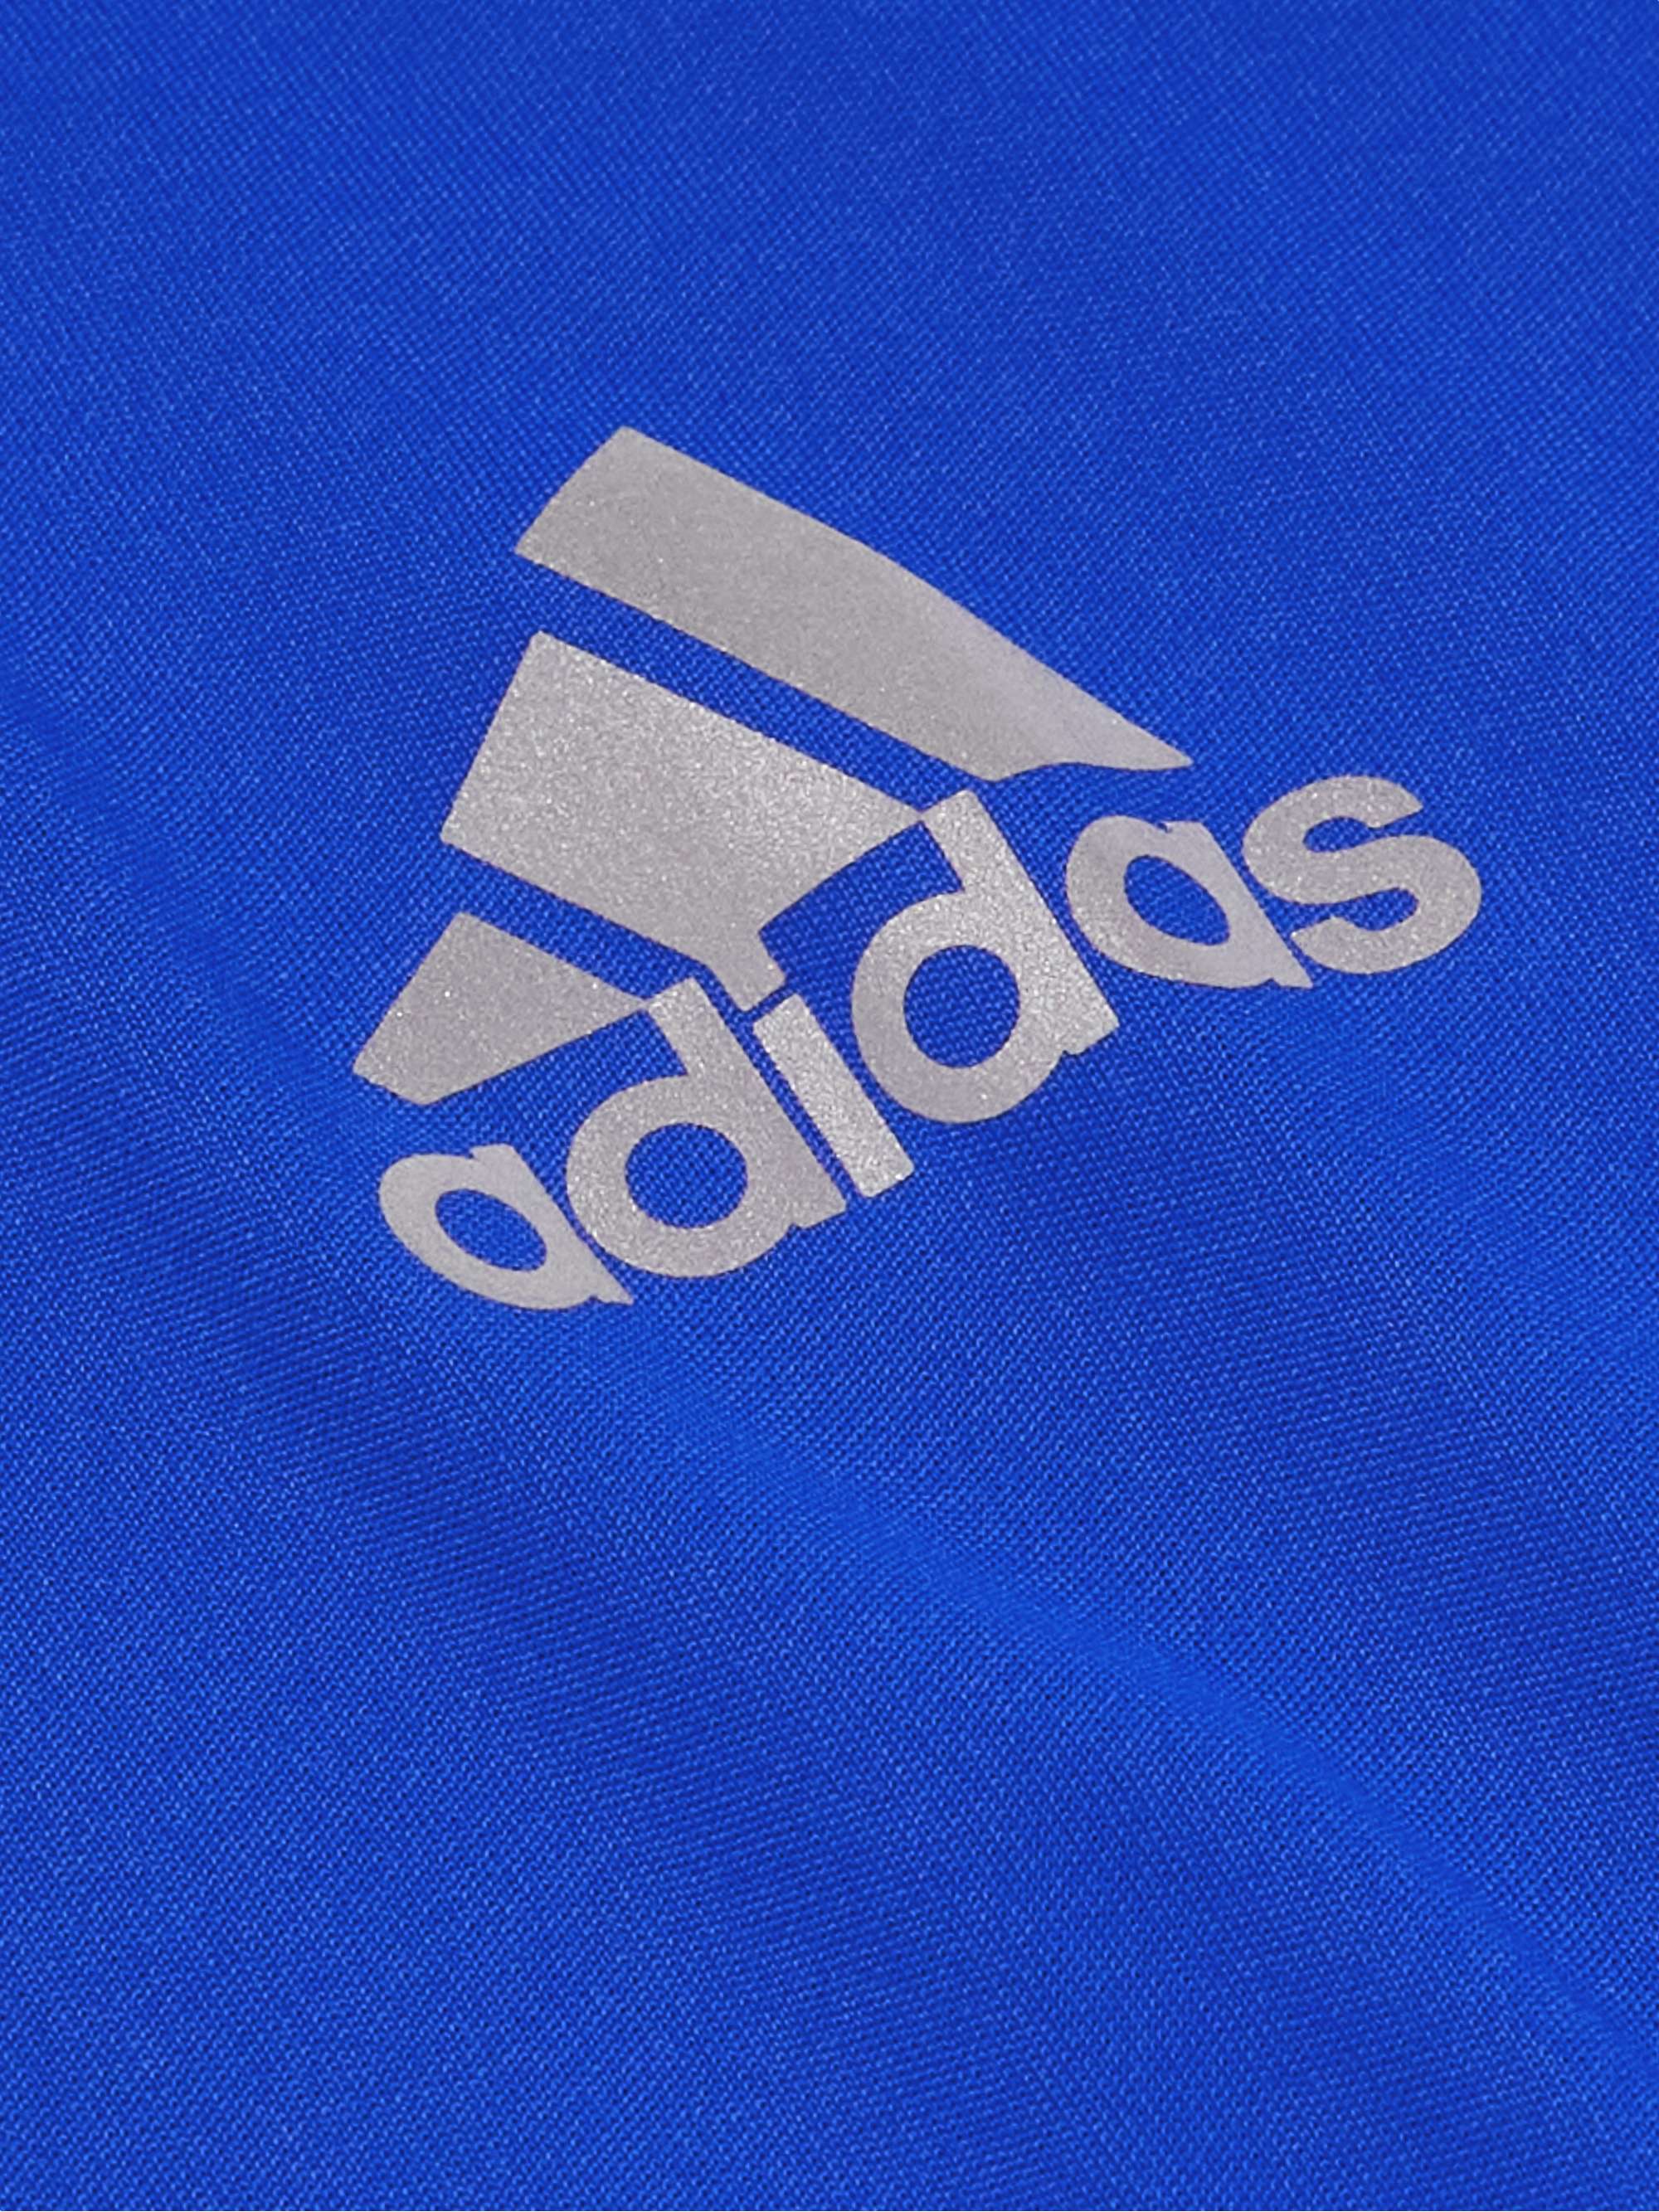 ADIDAS SPORT Own the Run Paneled Mesh and Jersey T-Shirt